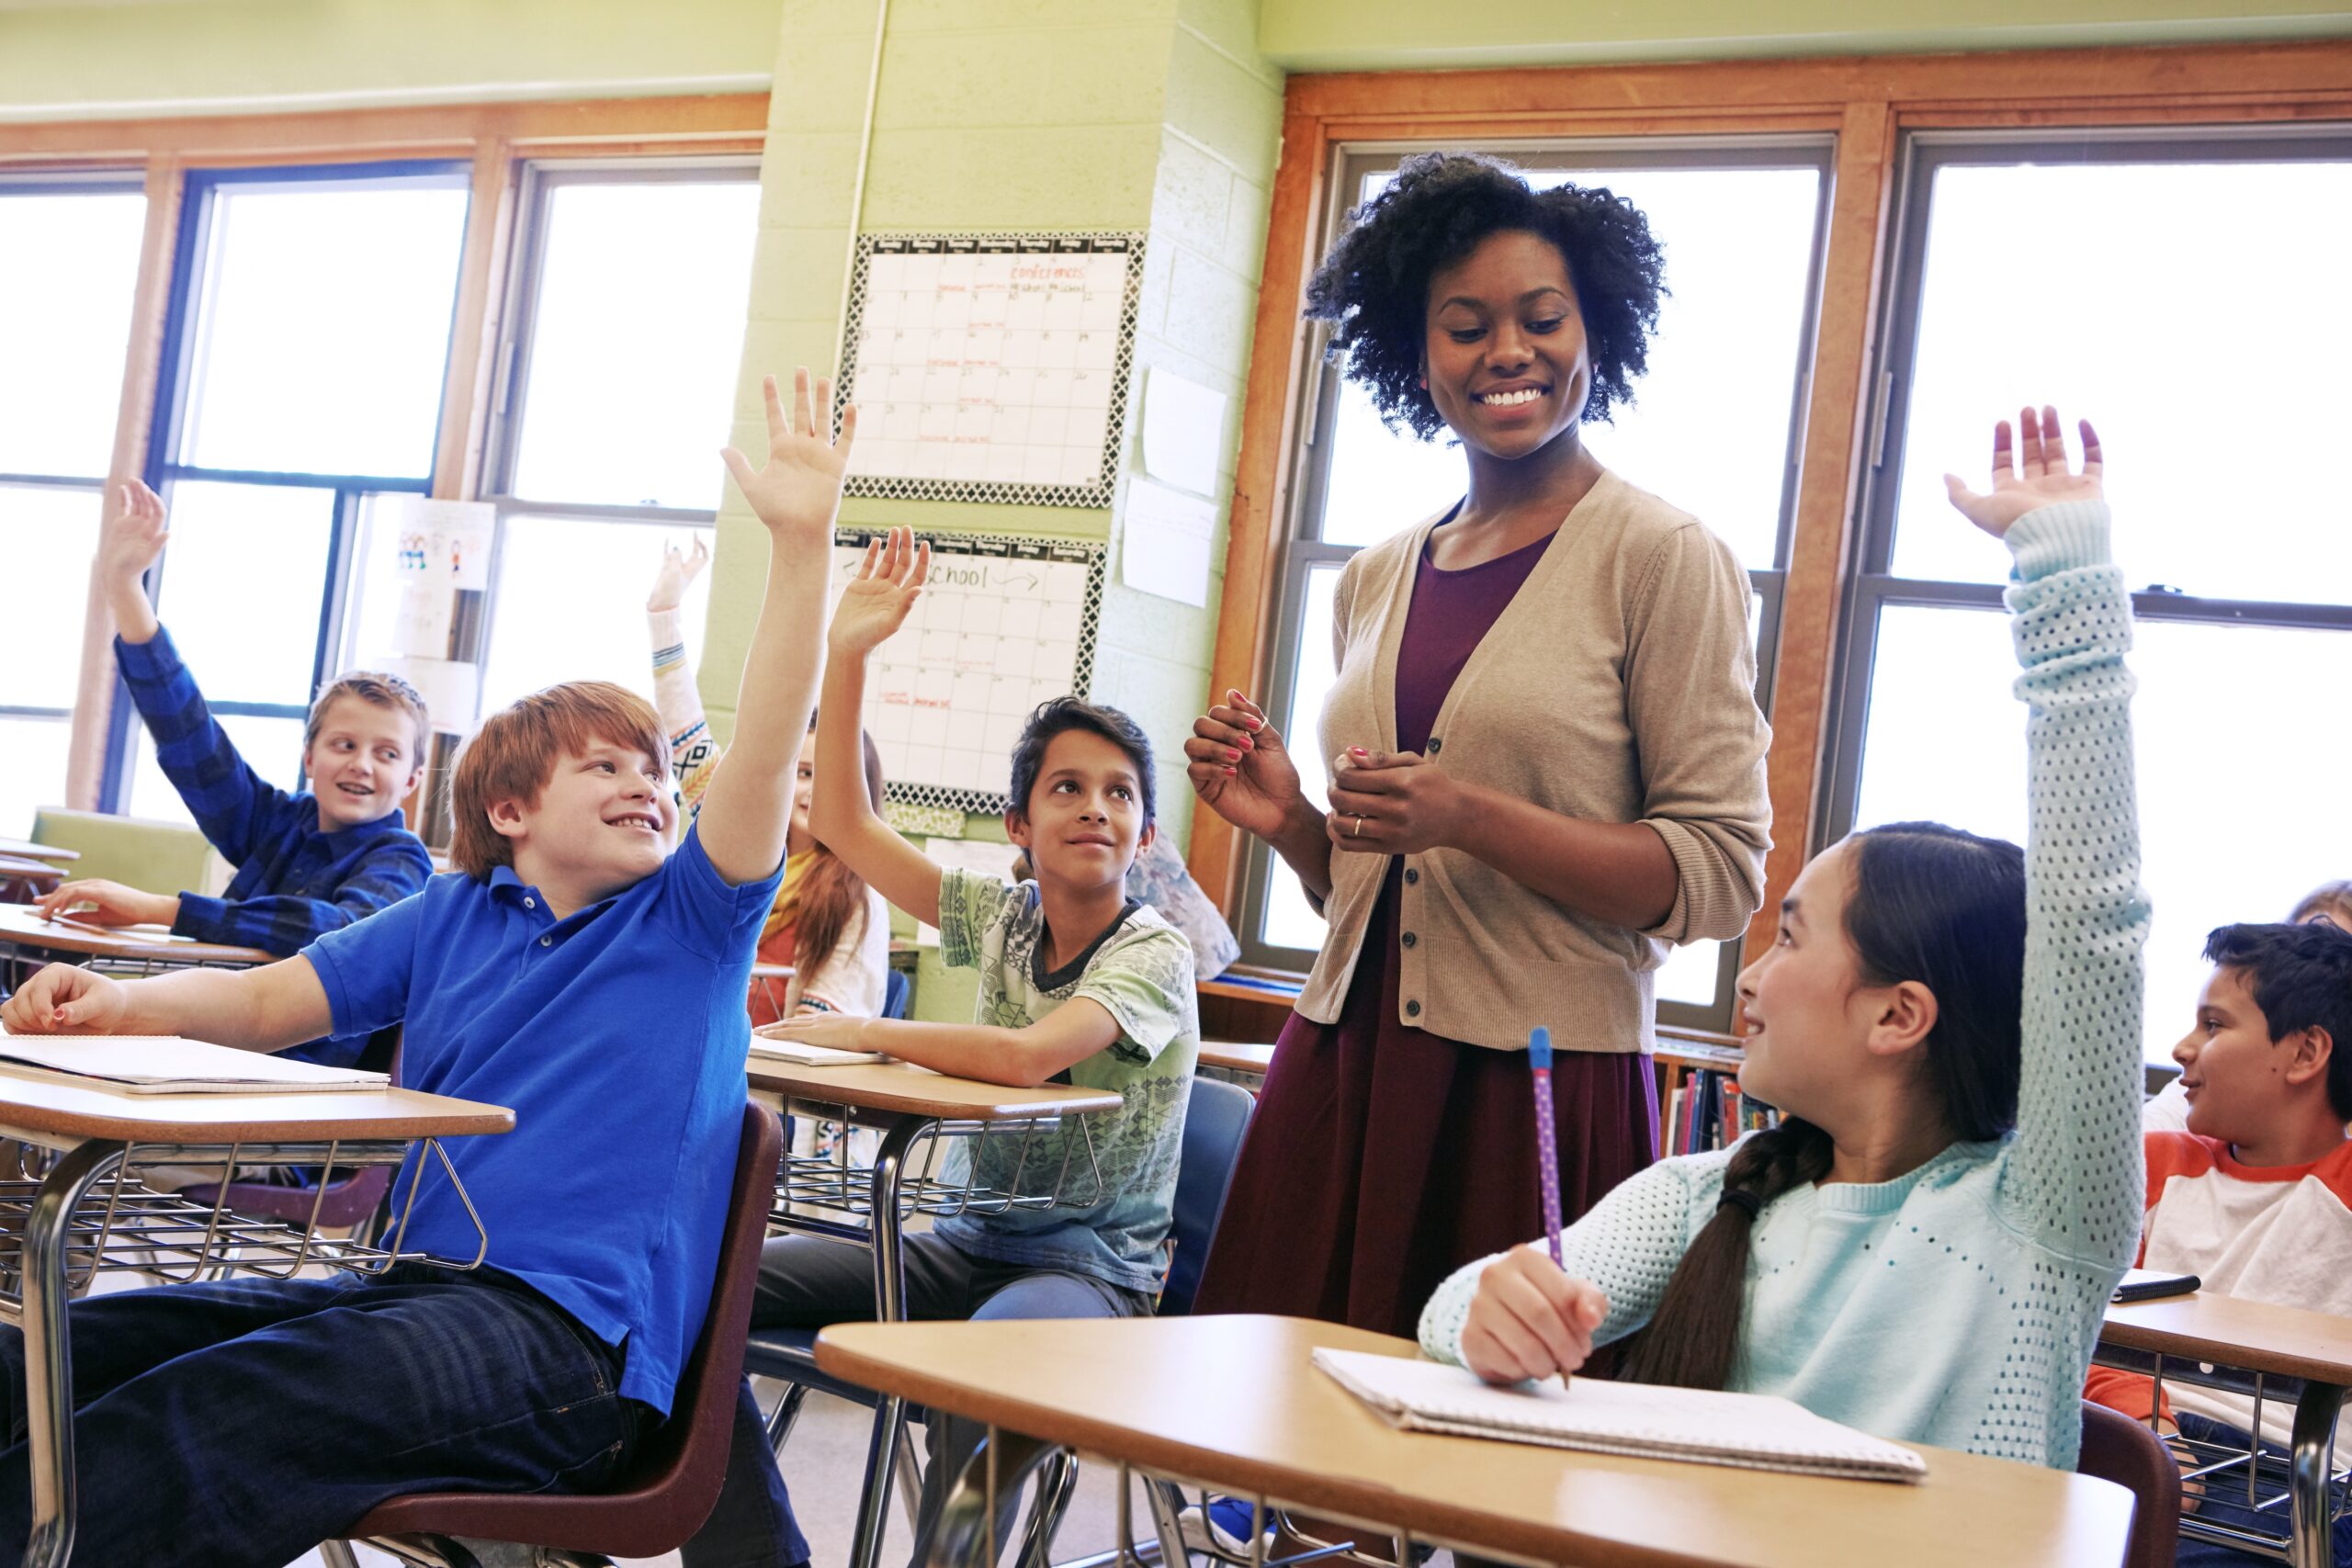 Teacher standing in rows of students with hands raised